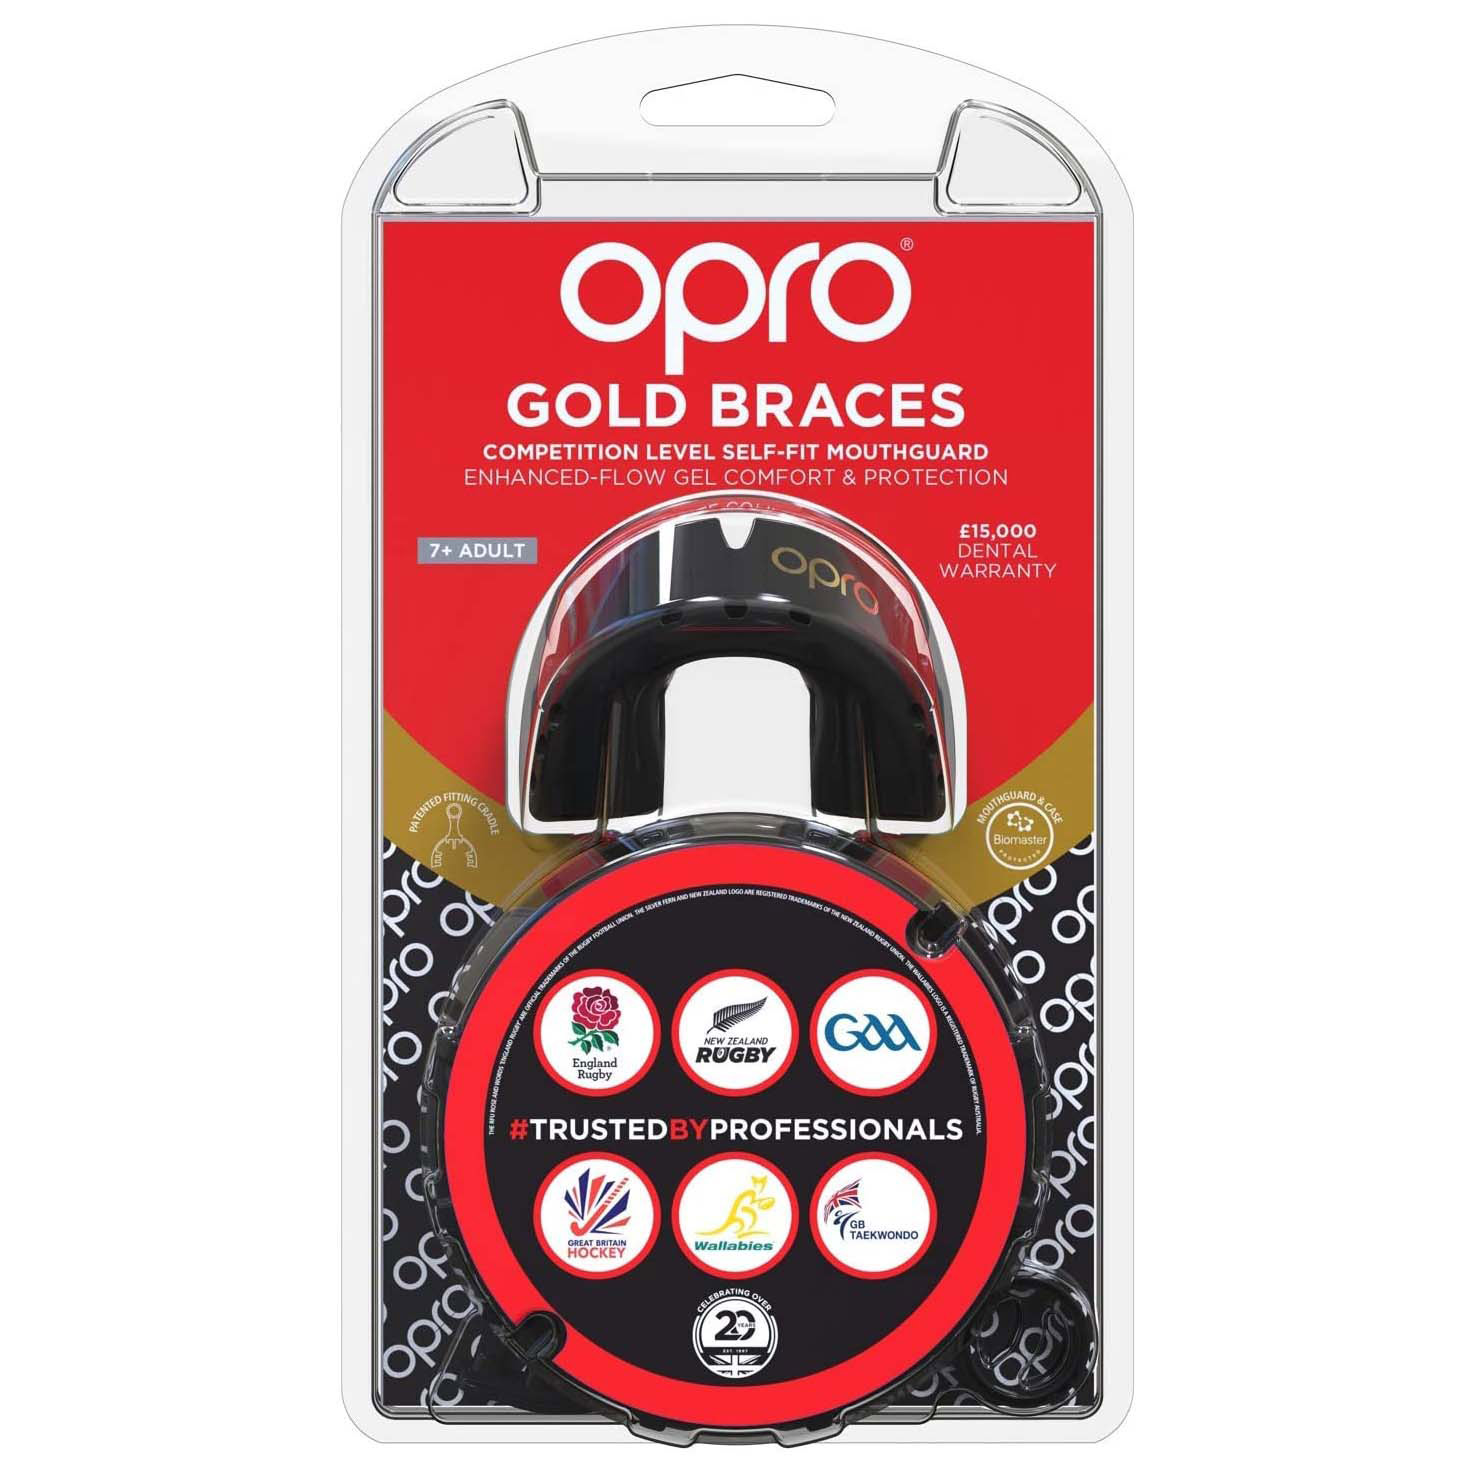 OPRO SELF-FIT MOUTHGUARD FOR BRACES - GOLD LEVEL